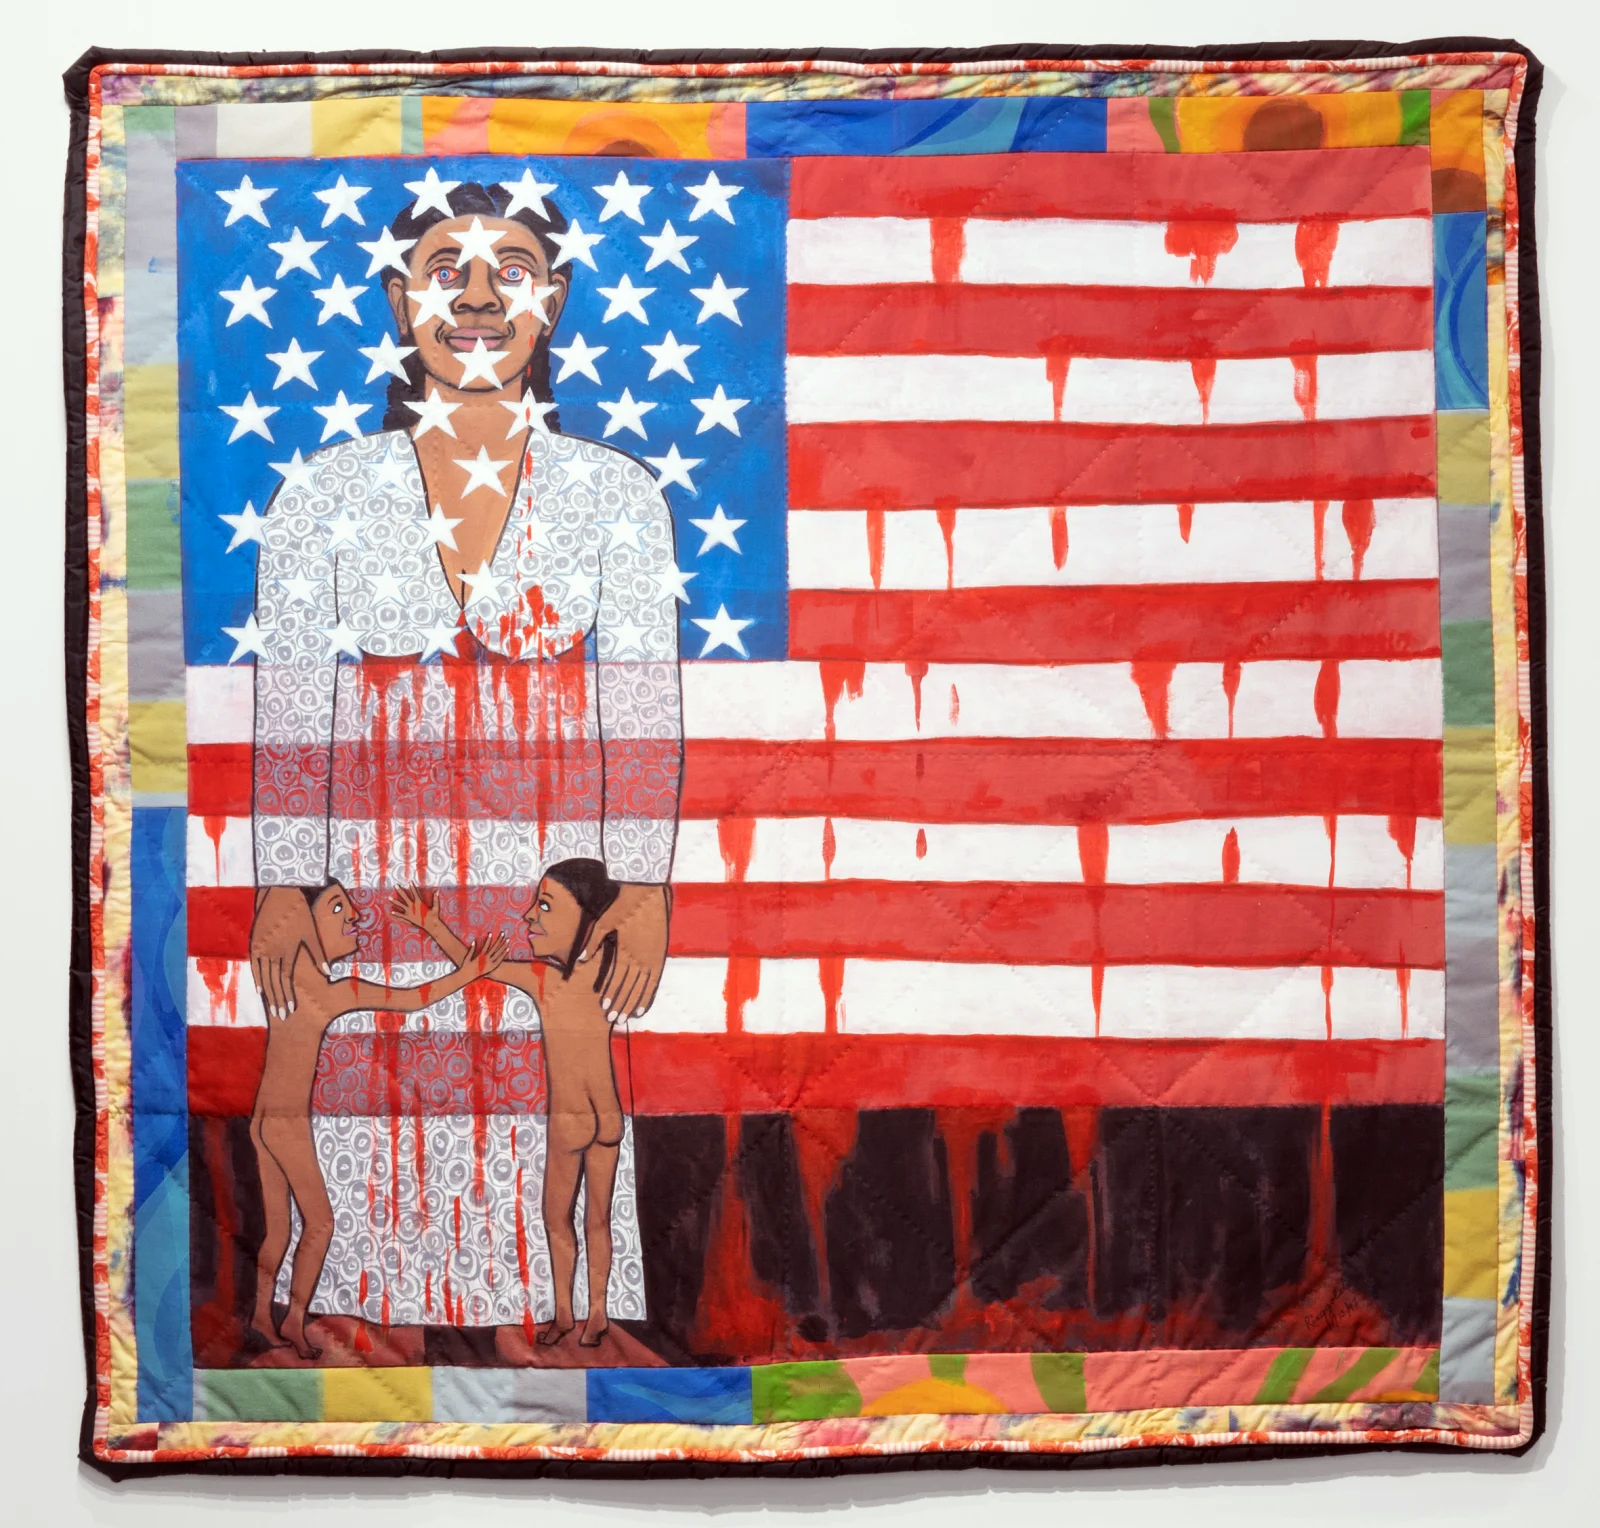 Faith Ringgold, The Flag is Bleeding #2 (American Collection #6), 1997, acrylic on canvas, painted and pieced border. 193 x 200.7 cm (Pippy Houldsworth Gallery) © Faith Ringgold